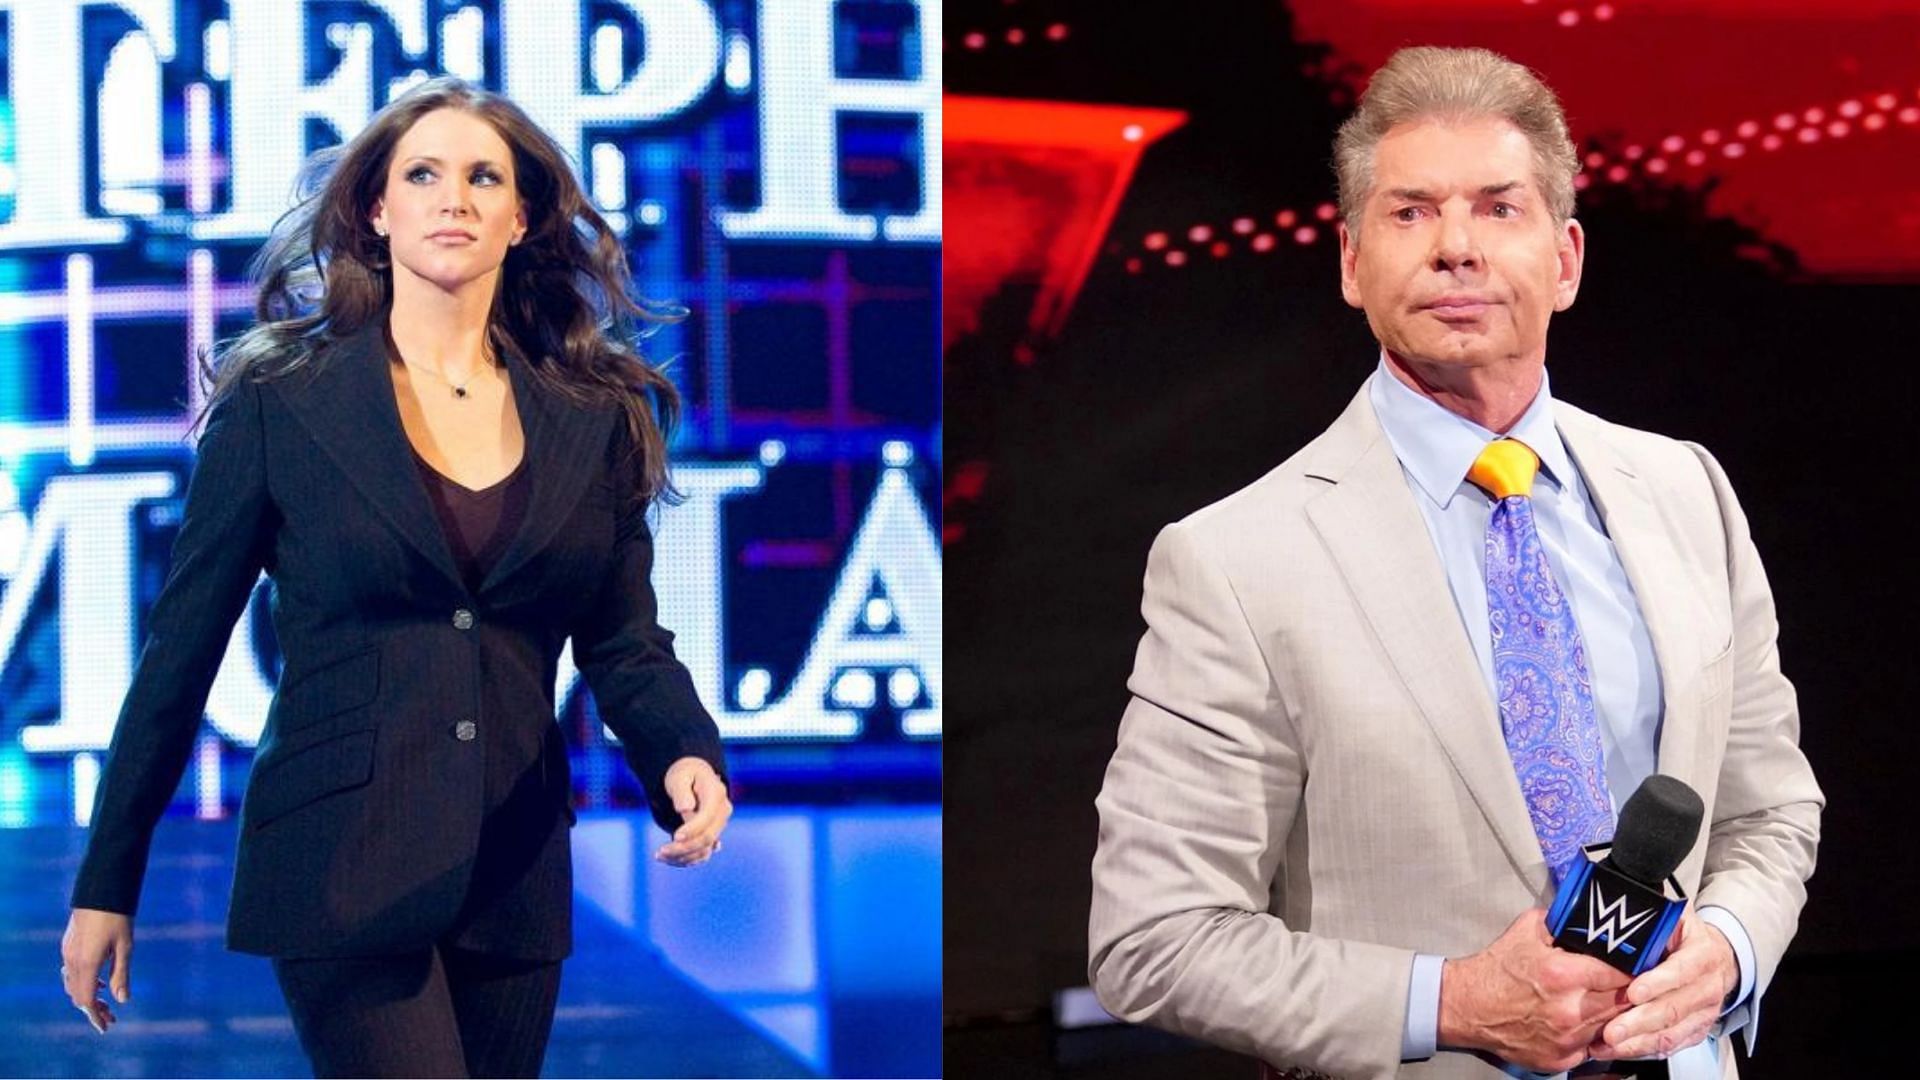 Co-CEO of WWE Stephanie McMahon &amp; Vince McMahon